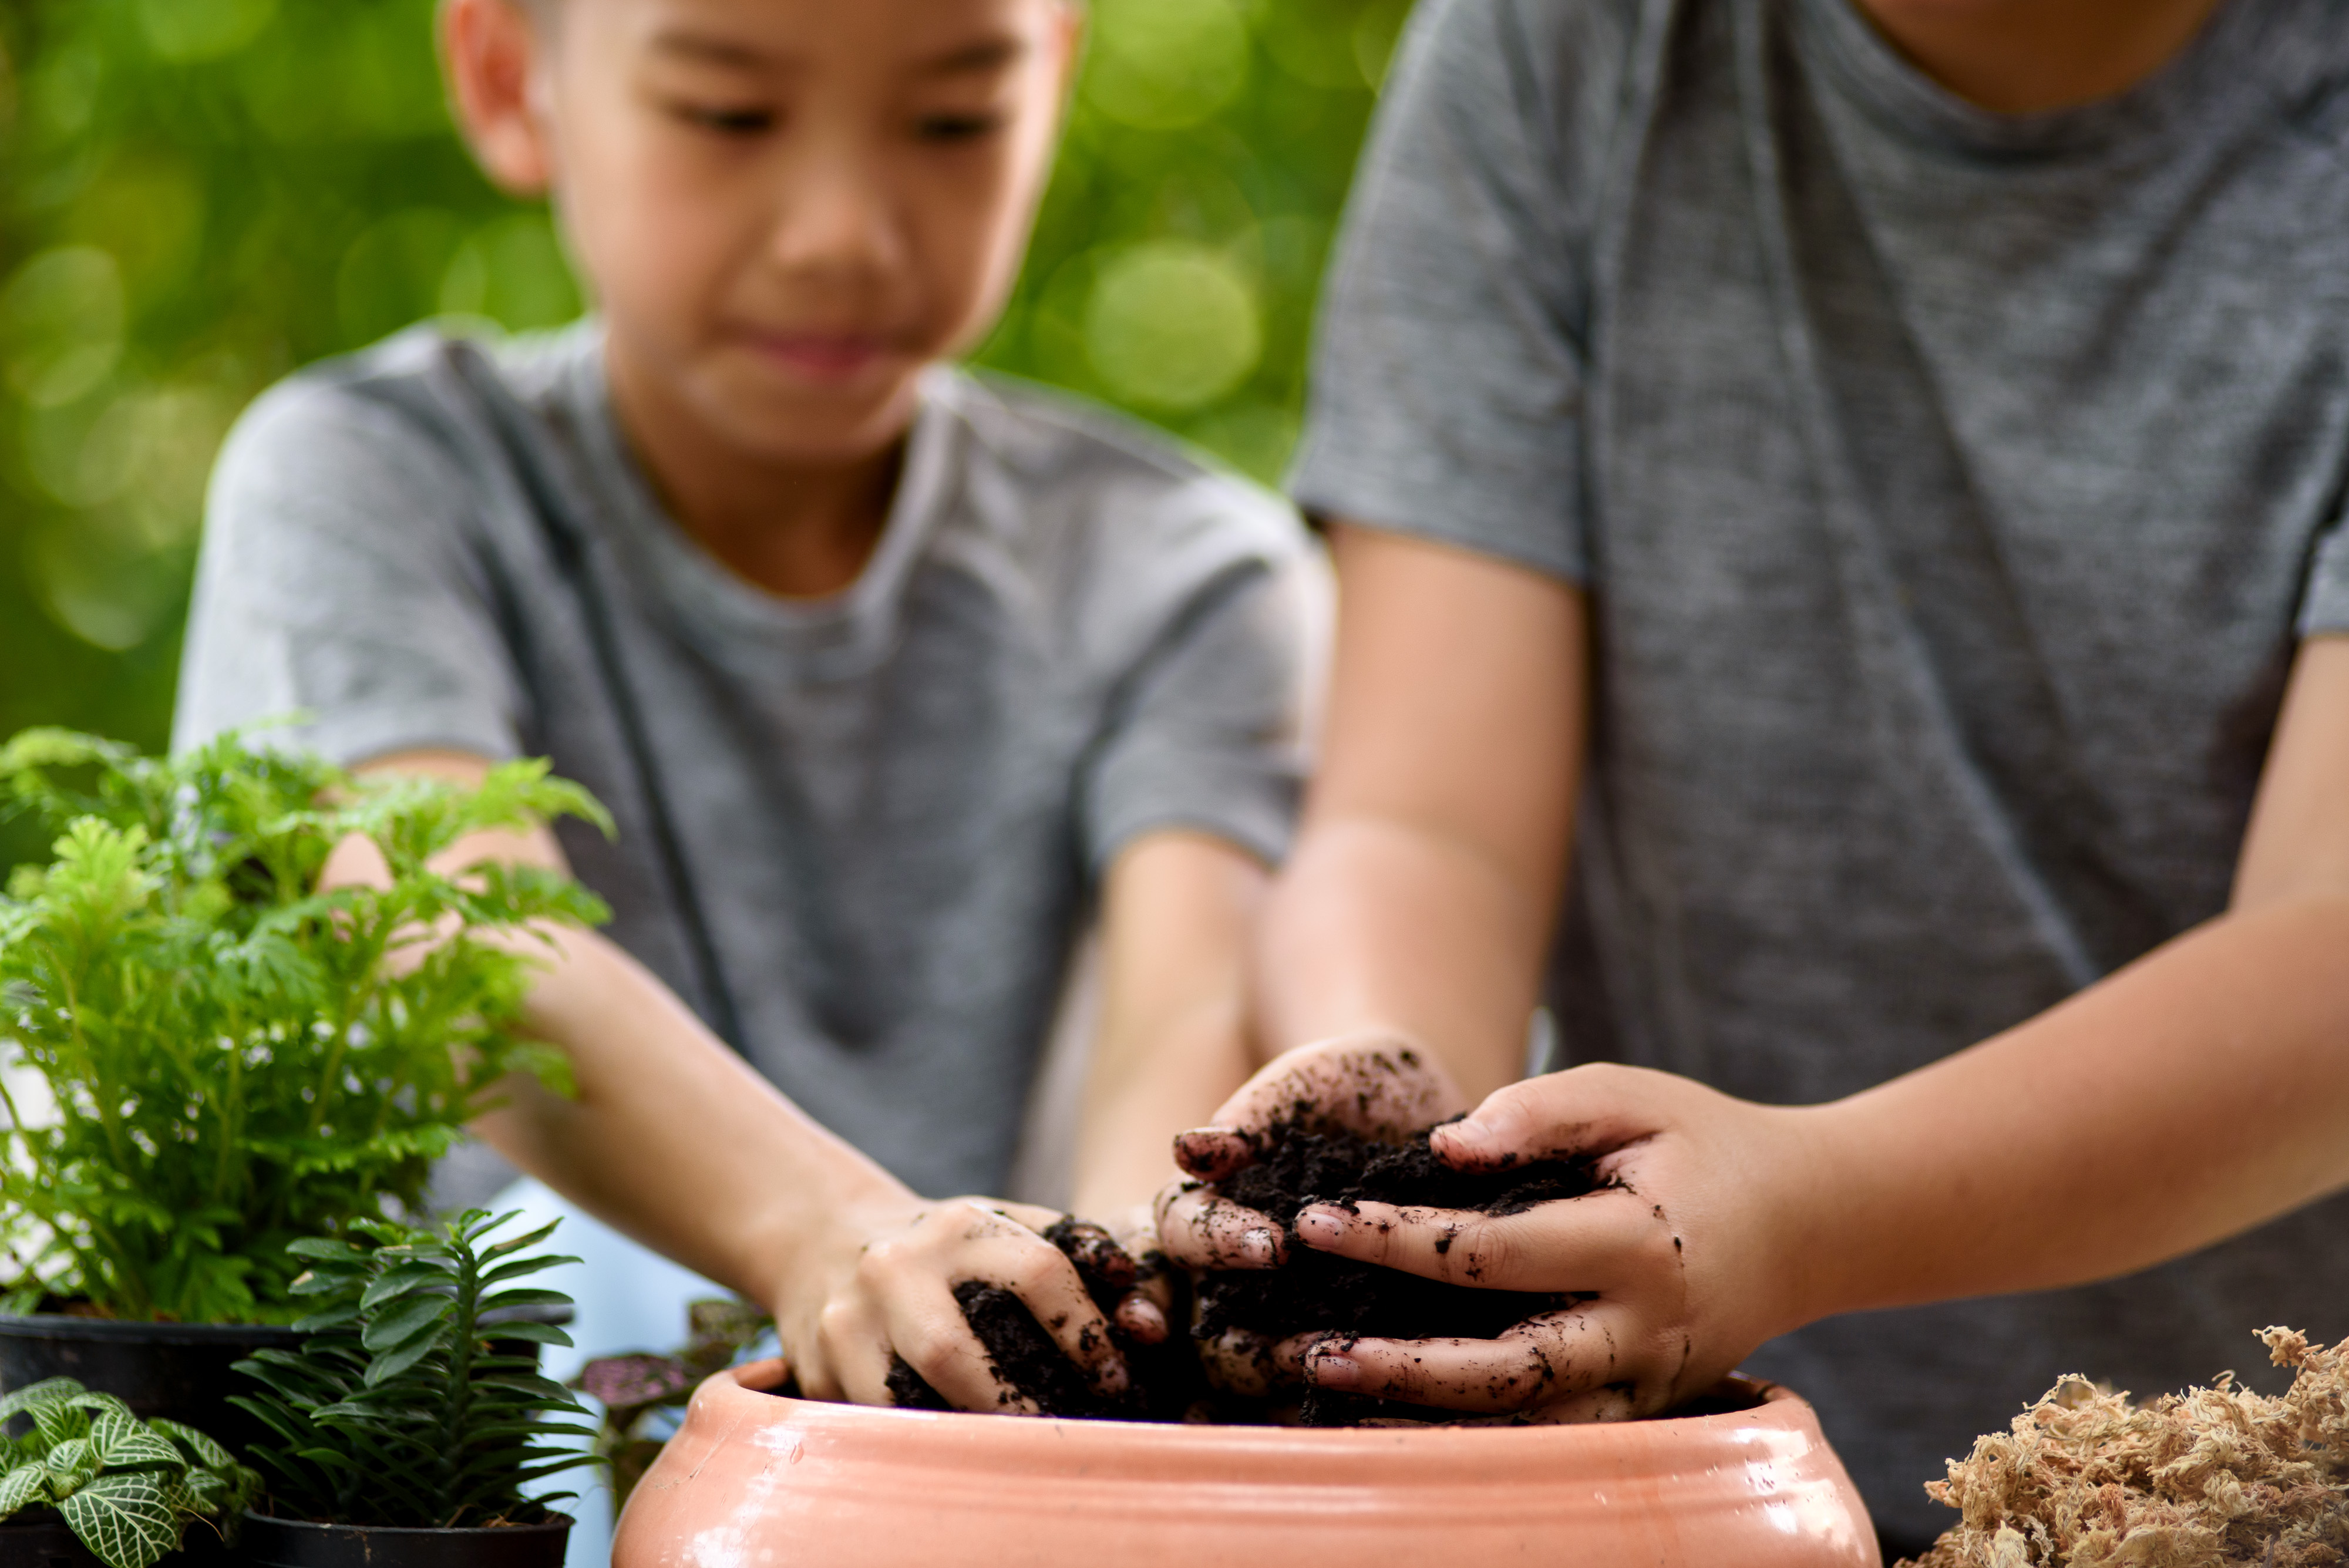 Two people put their hands into a pot of dirt.